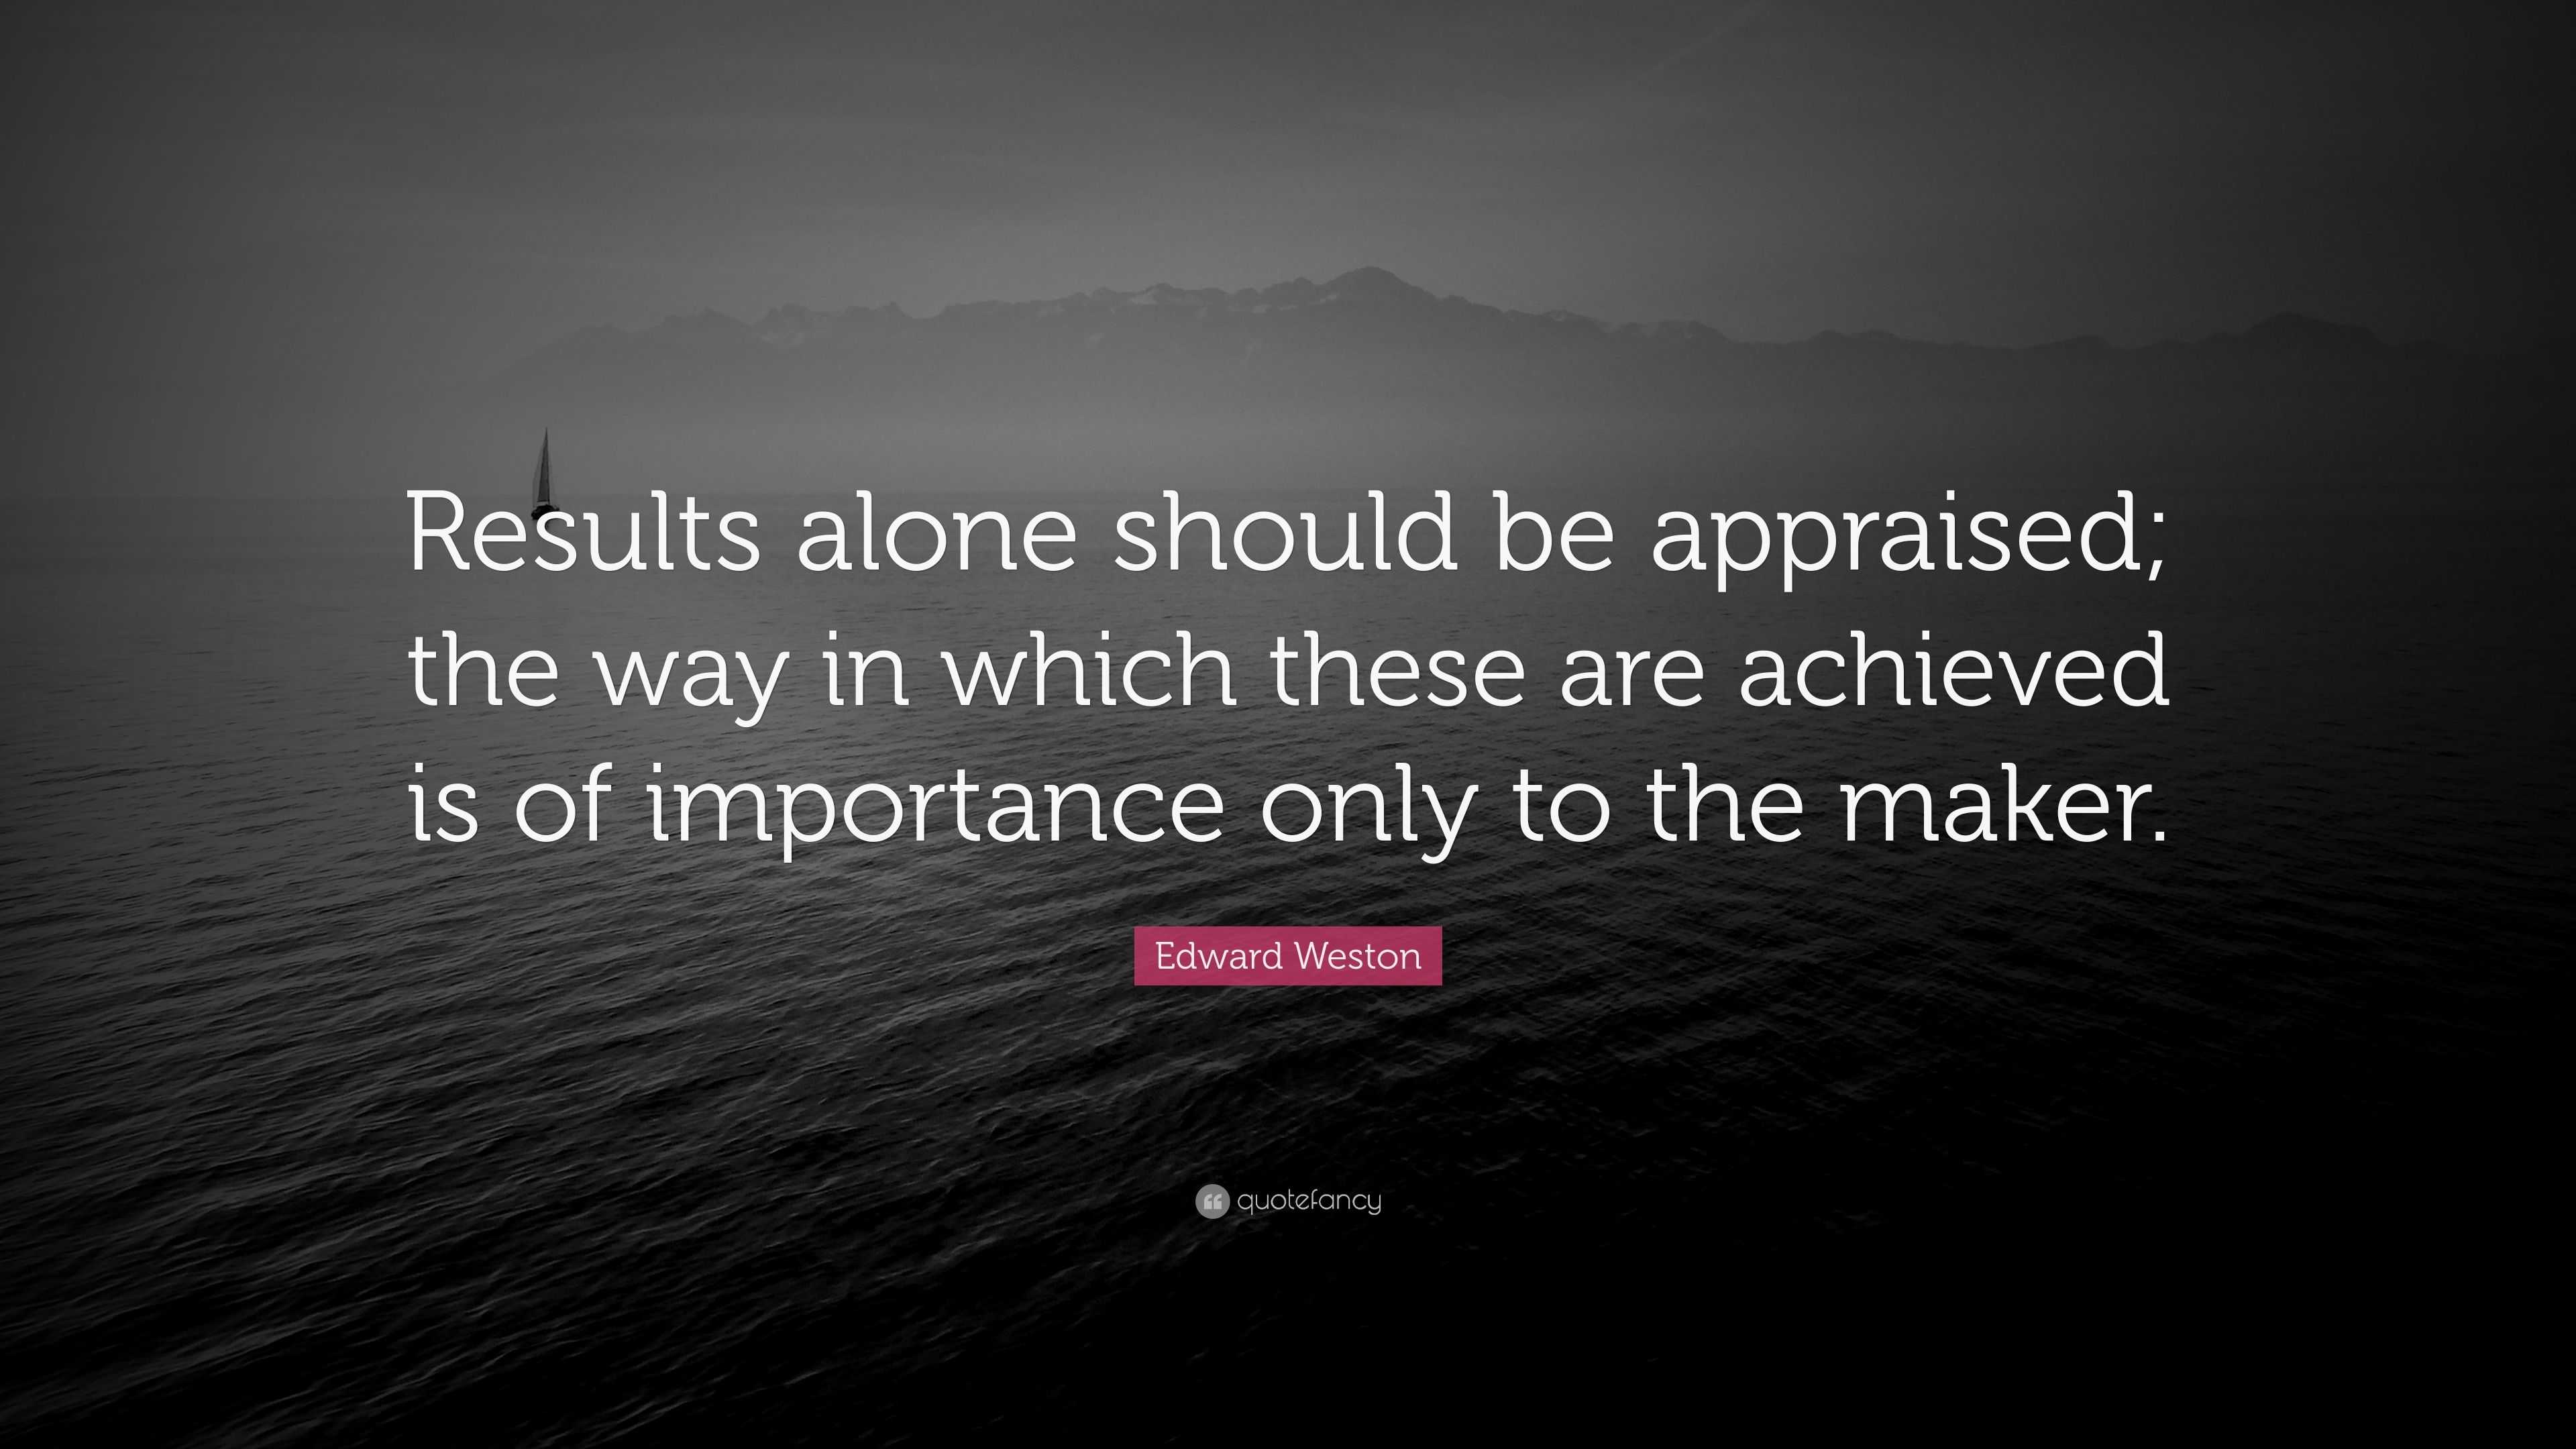 Edward Weston Quote: “Results alone should be appraised; the way in ...